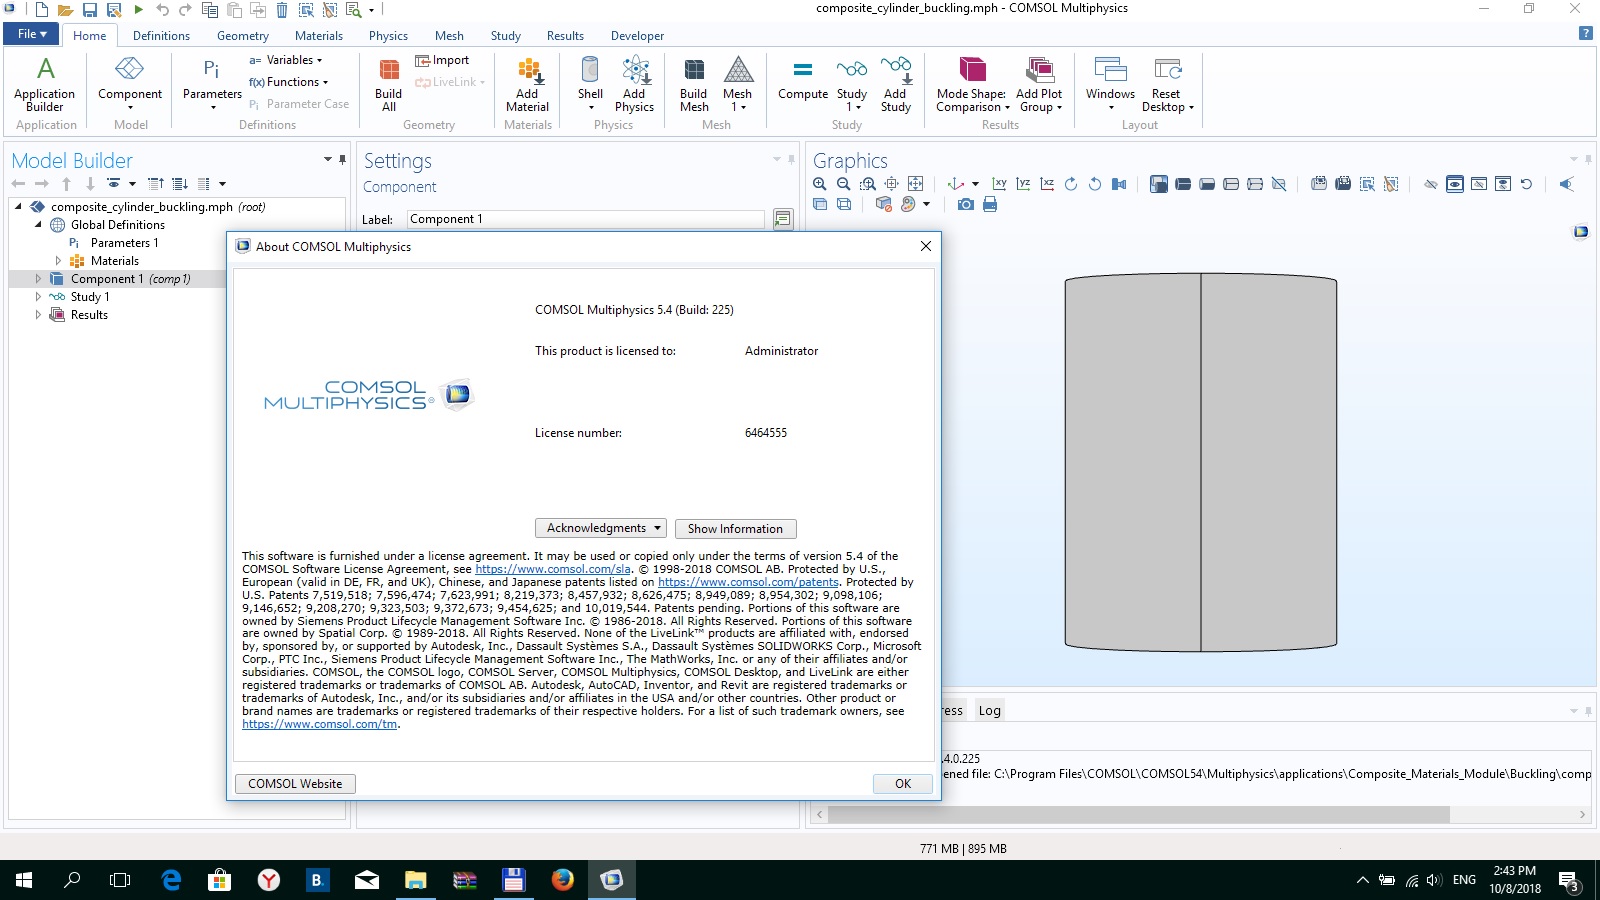 Working with COMSOL Multiphysics 5.4.0 full license